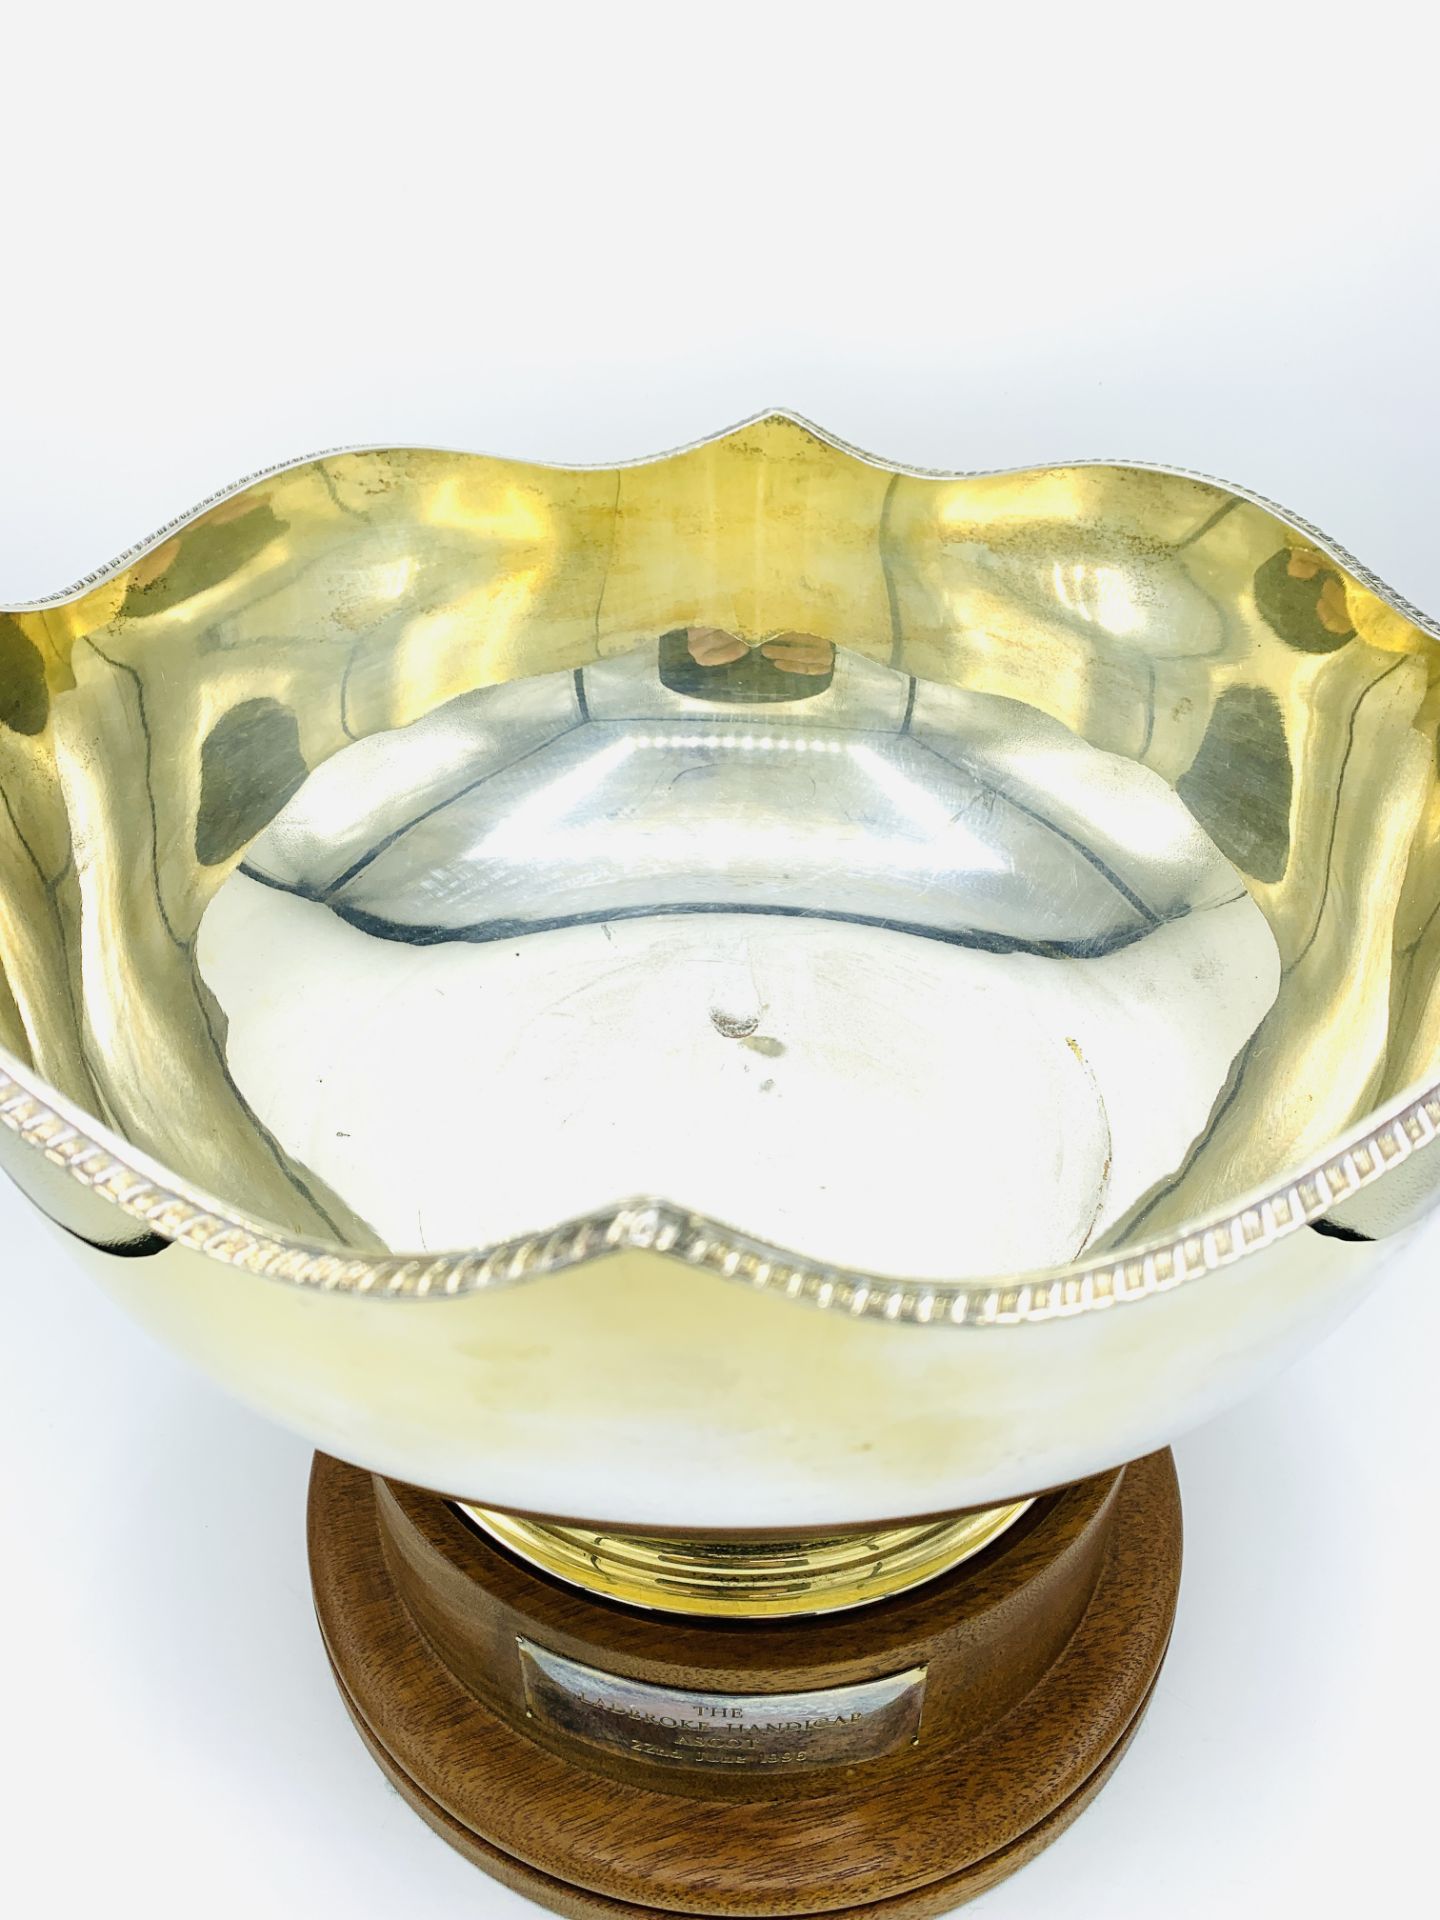 A gilded silver plate bowl, on plinth inscribed "The Ladbroke Handicap, Ascot, 22nd June 1996" - Image 2 of 4